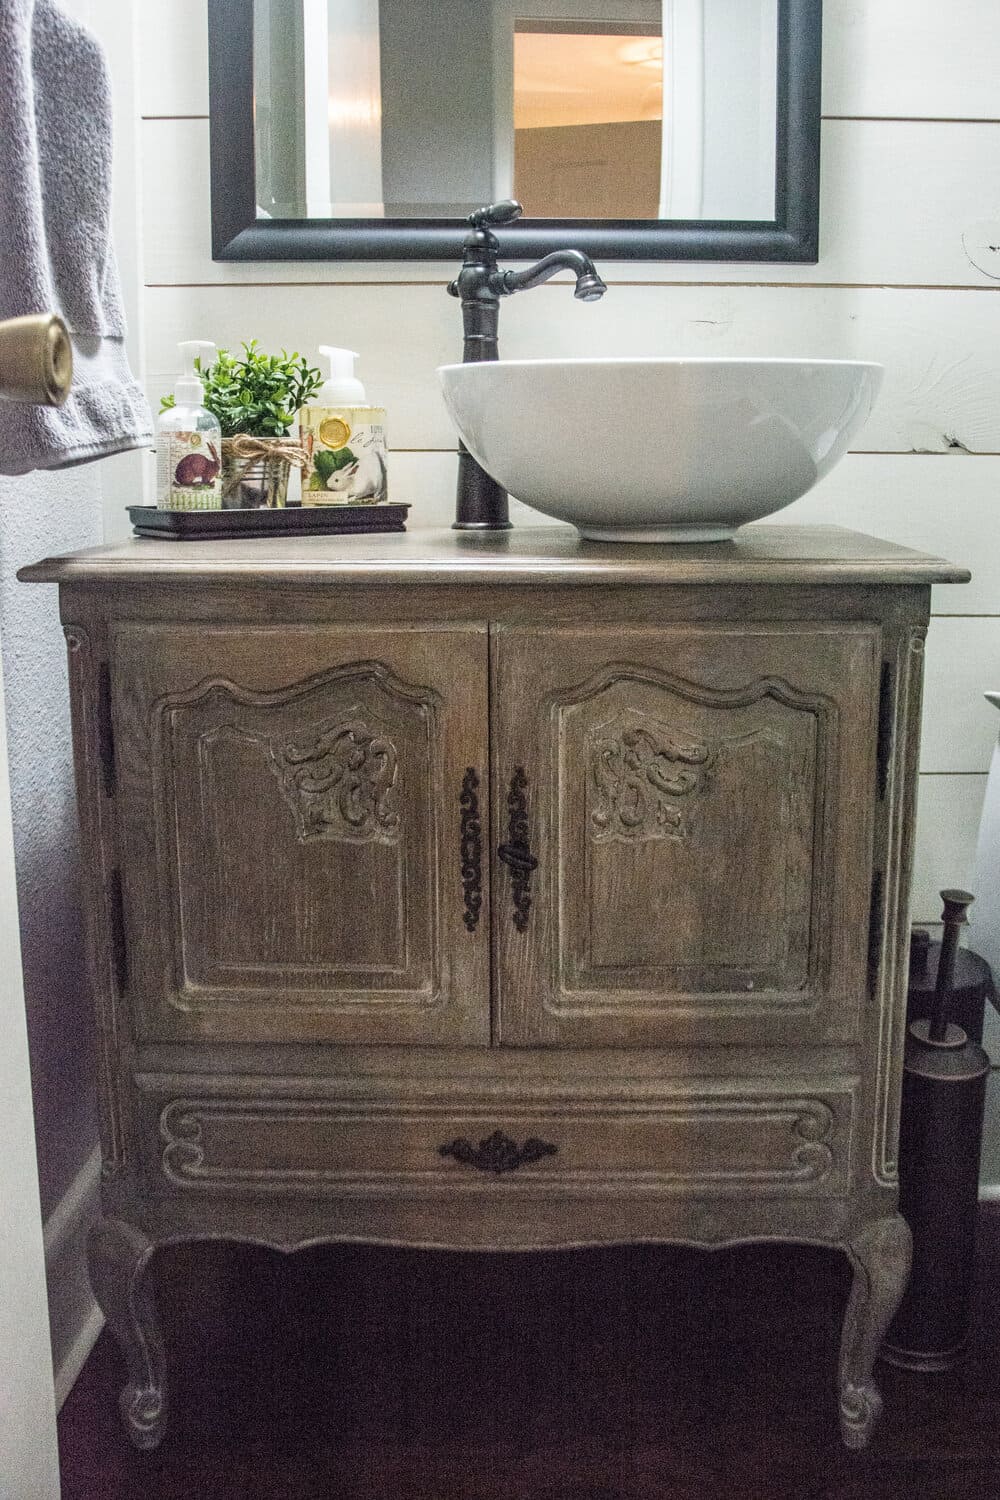 Rustic Undersink Storage with Bowl Sink and Dark Faucet